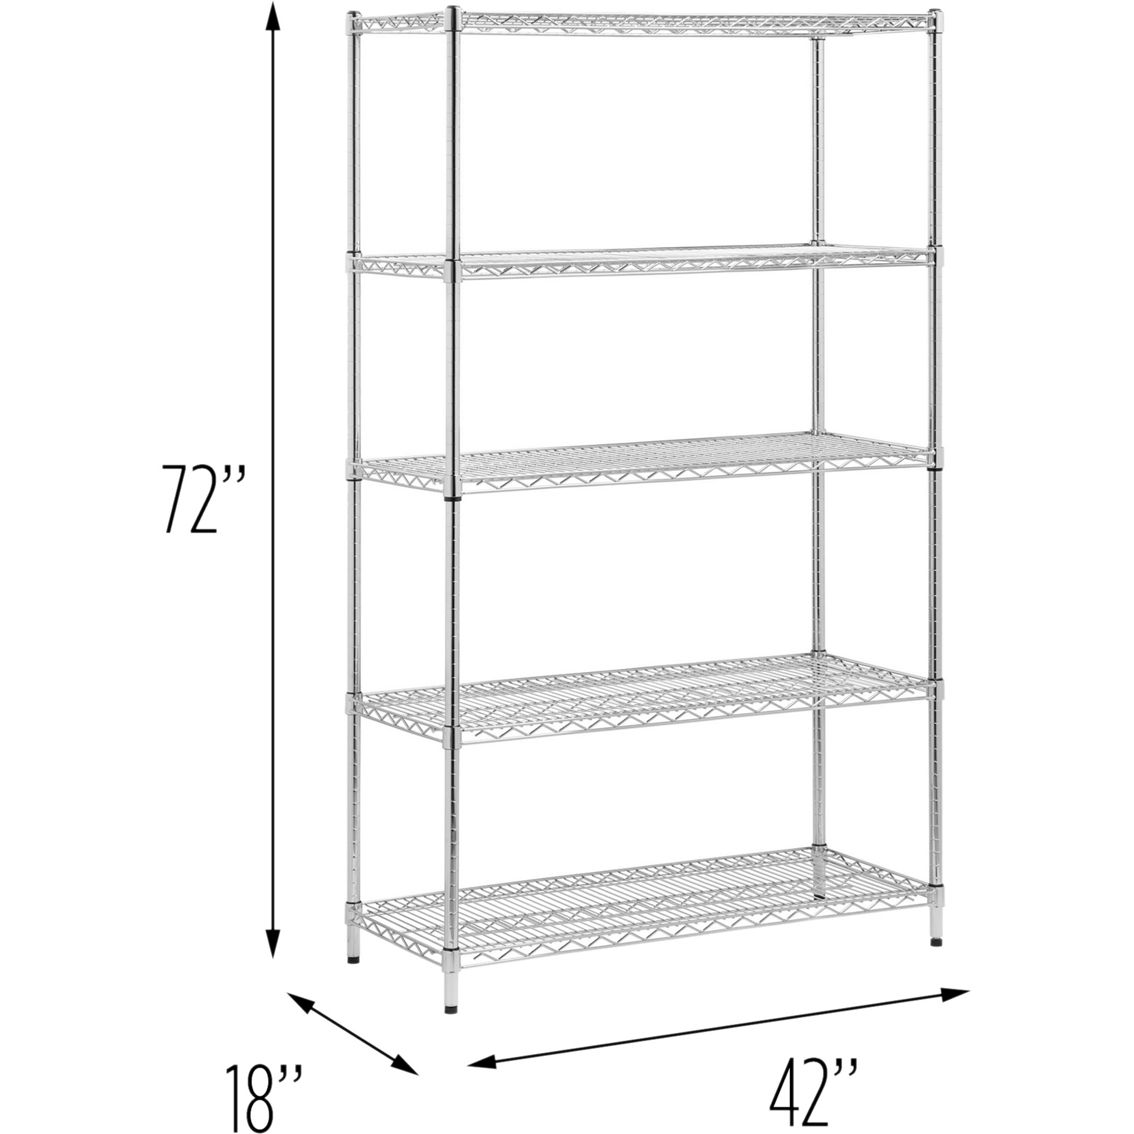 Honey Can Do 5 Tier Heavy Duty Adjustable Shelving Unit - Image 7 of 7